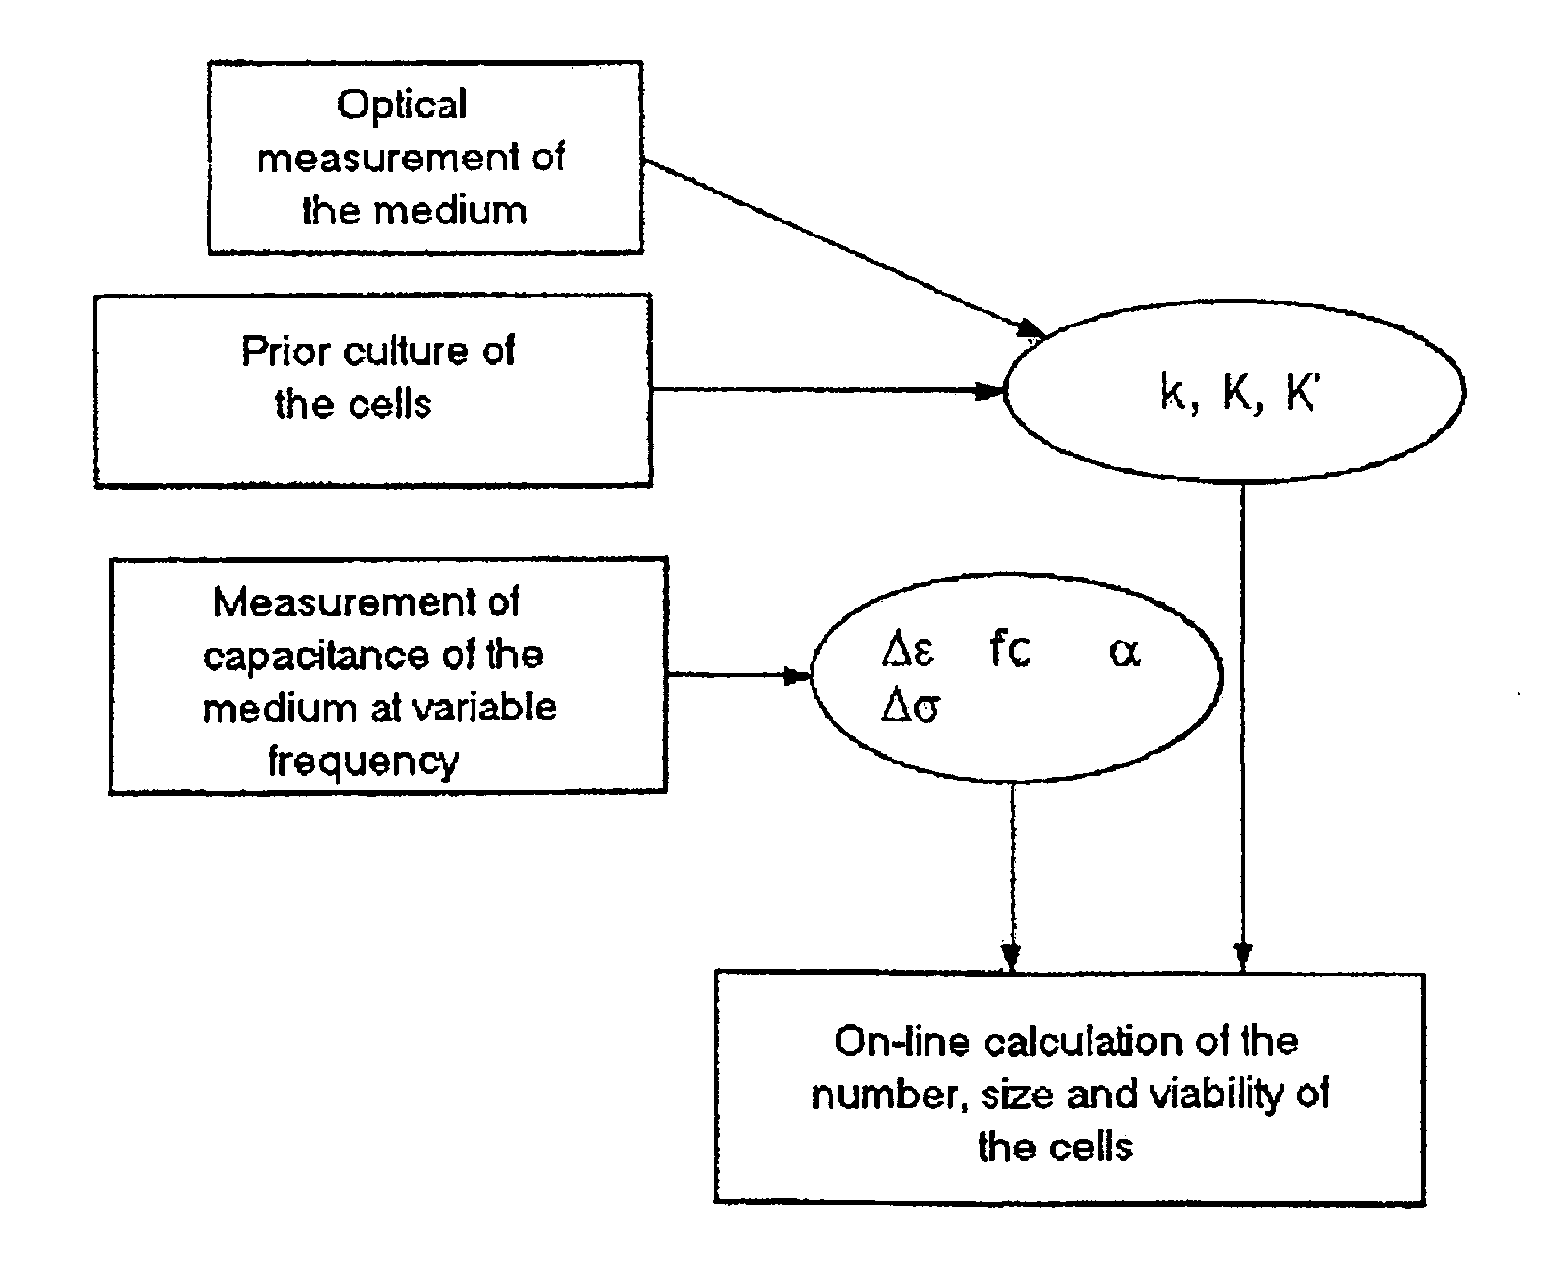 Process and system for on-line and in situ counting of cells in a biological culture medium